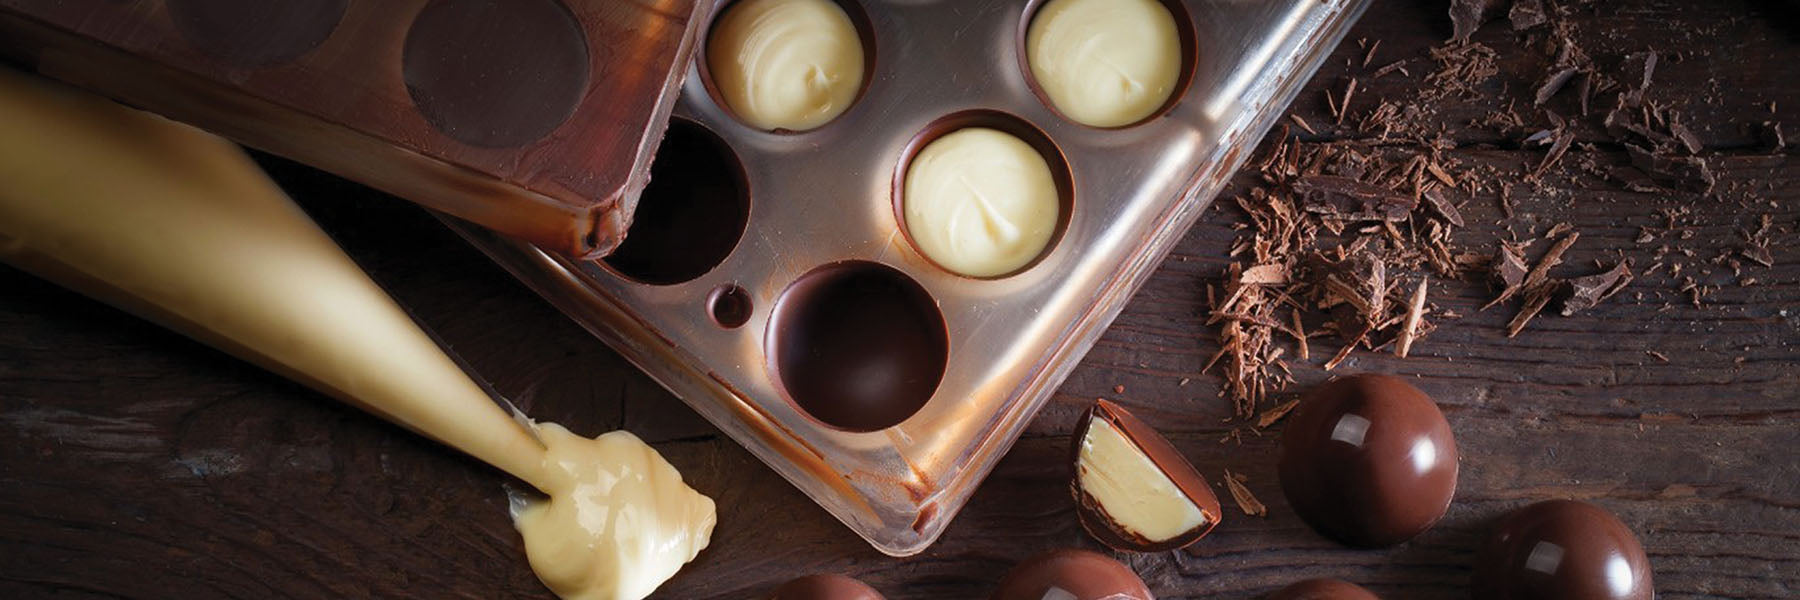 CHOCOLATE MOULDS